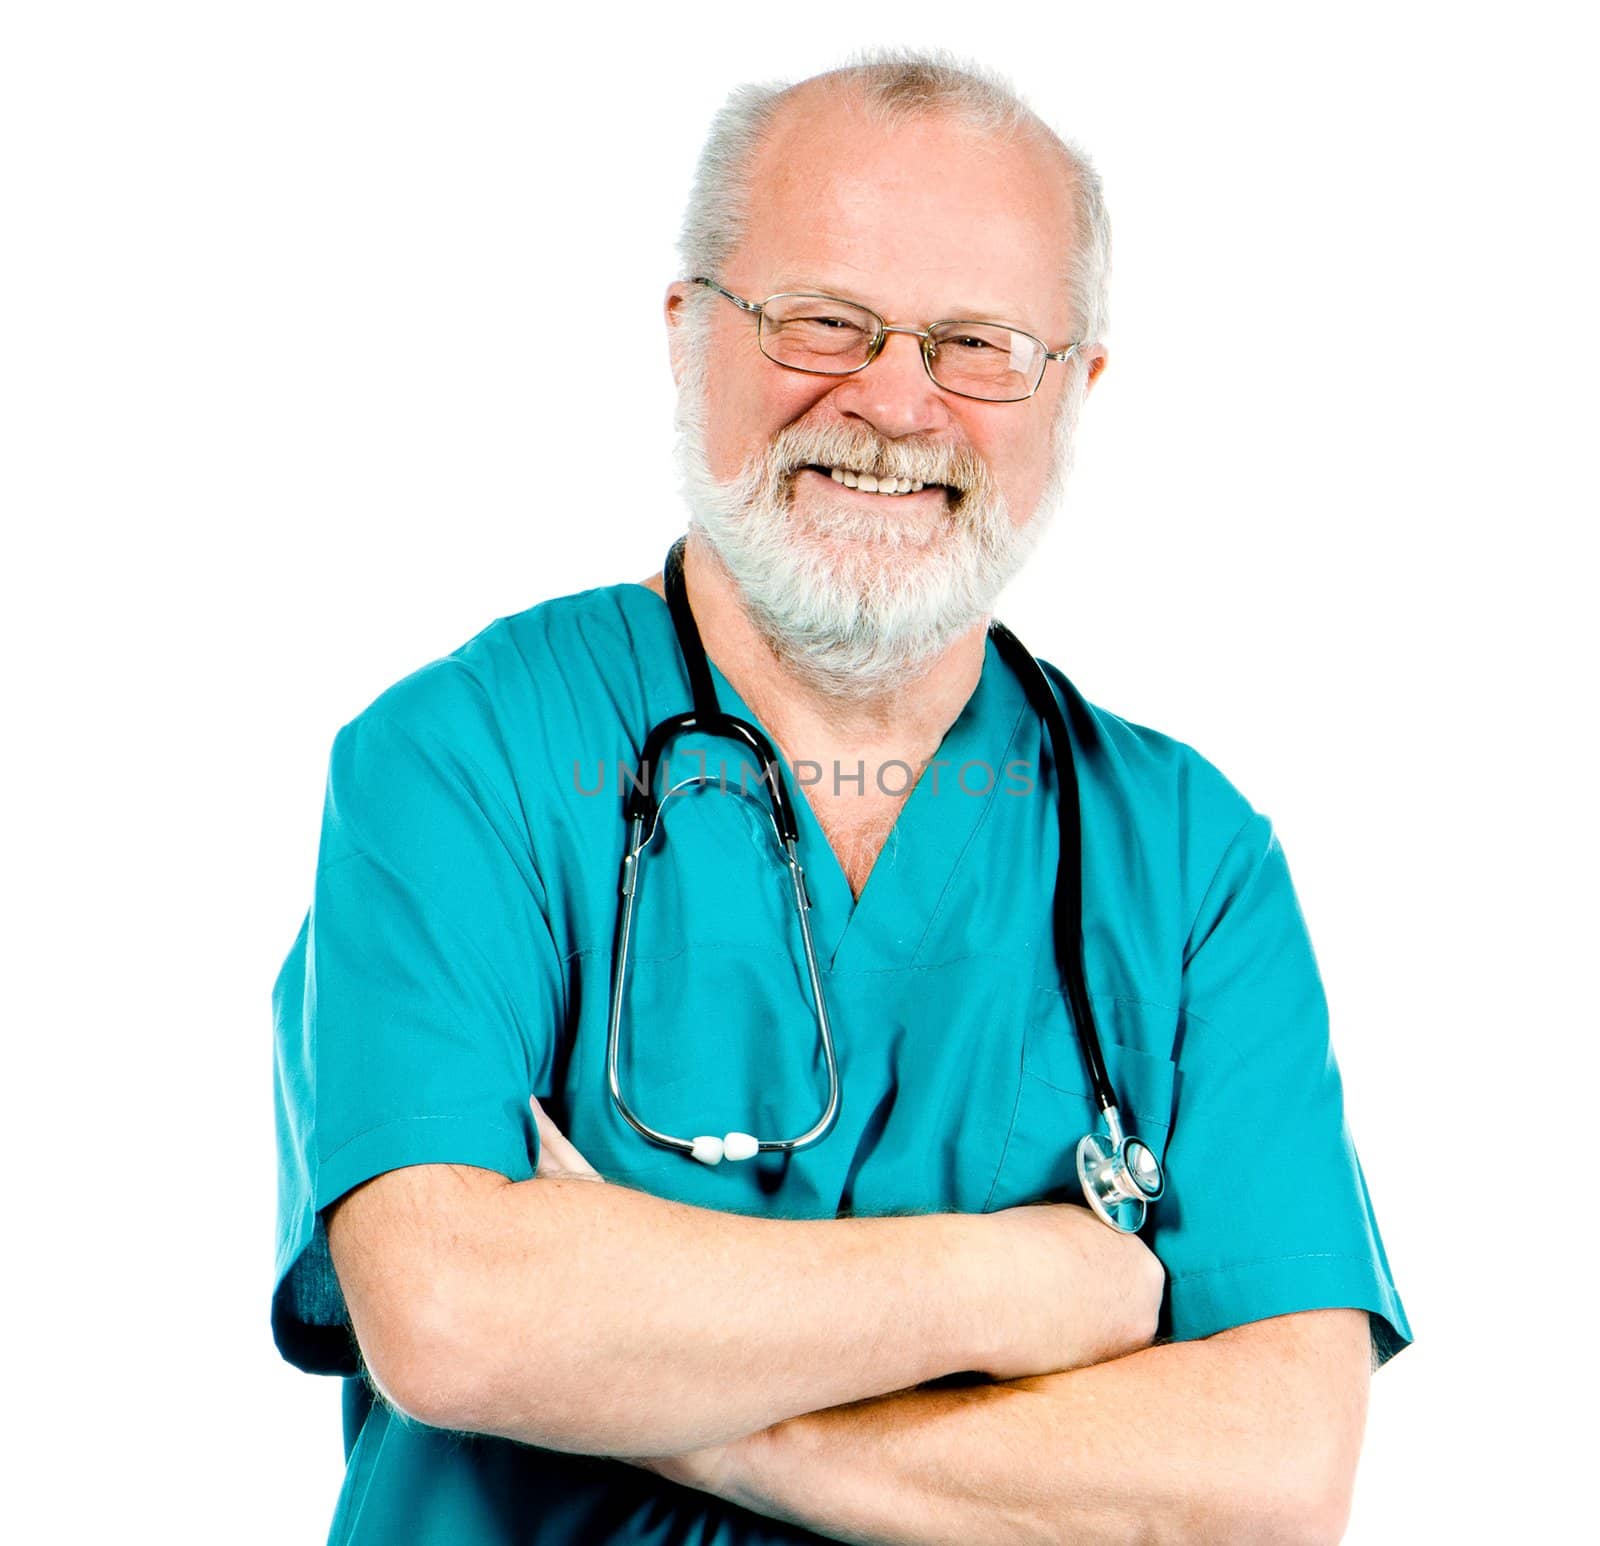 Portrait of smiling doctor on a white background